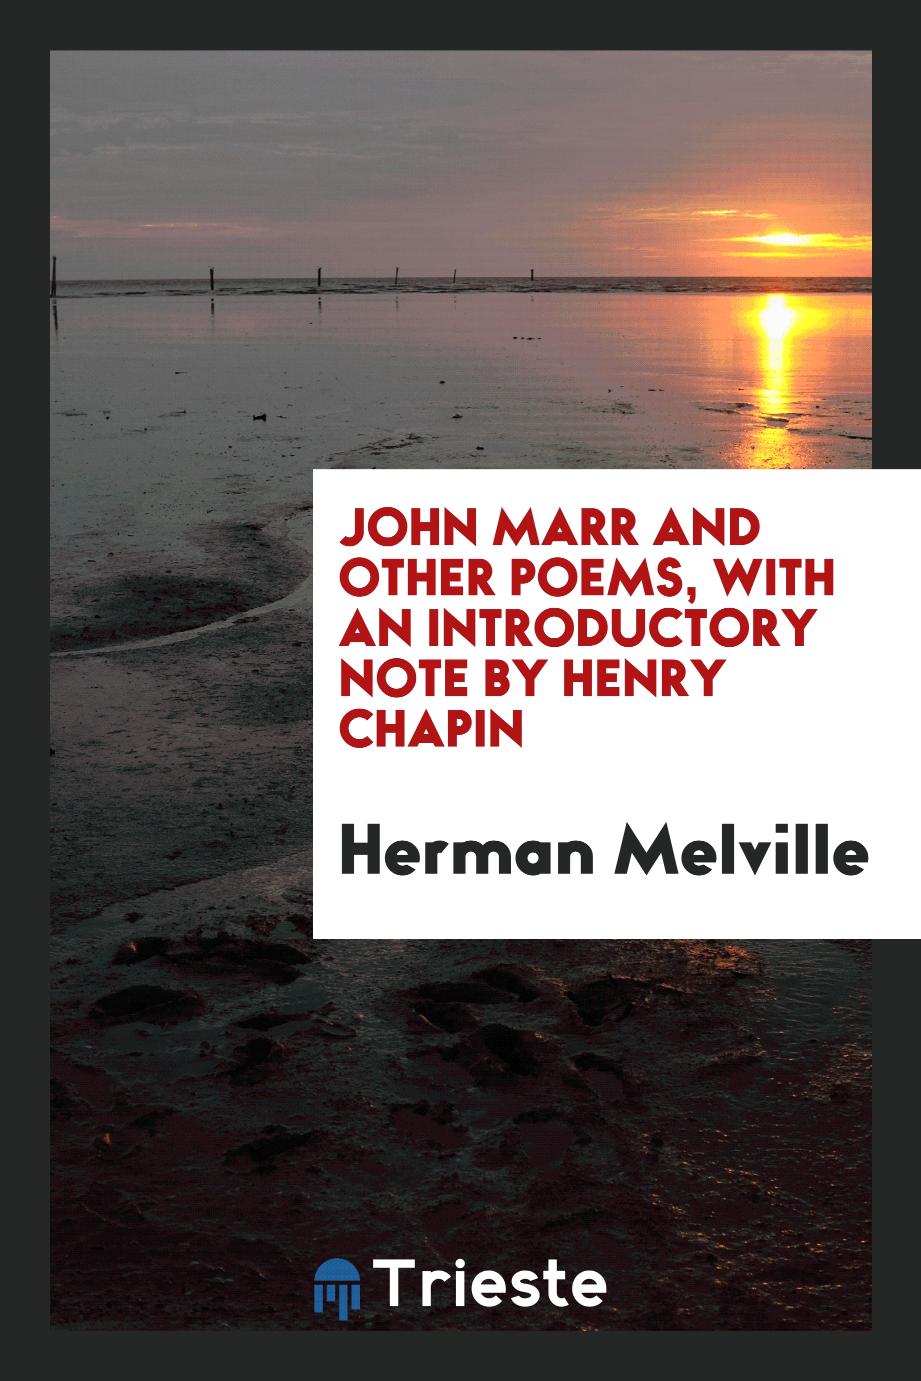 John Marr and other poems, with an introductory note by Henry Chapin